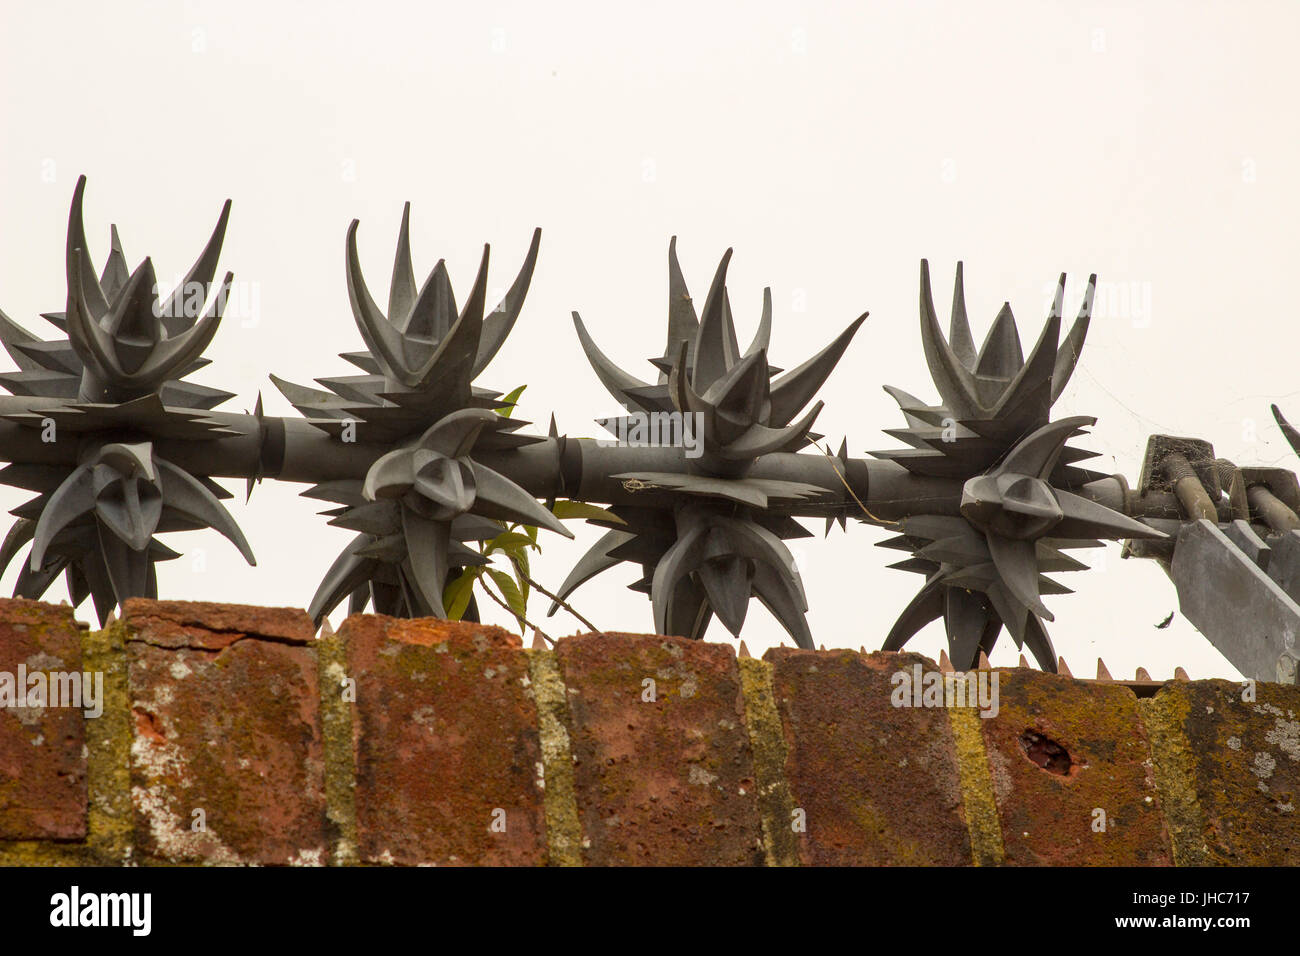 Anti wall climbing spinners with sharp barbs on the top of a brick wall to deter intruders and burglars Stock Photo